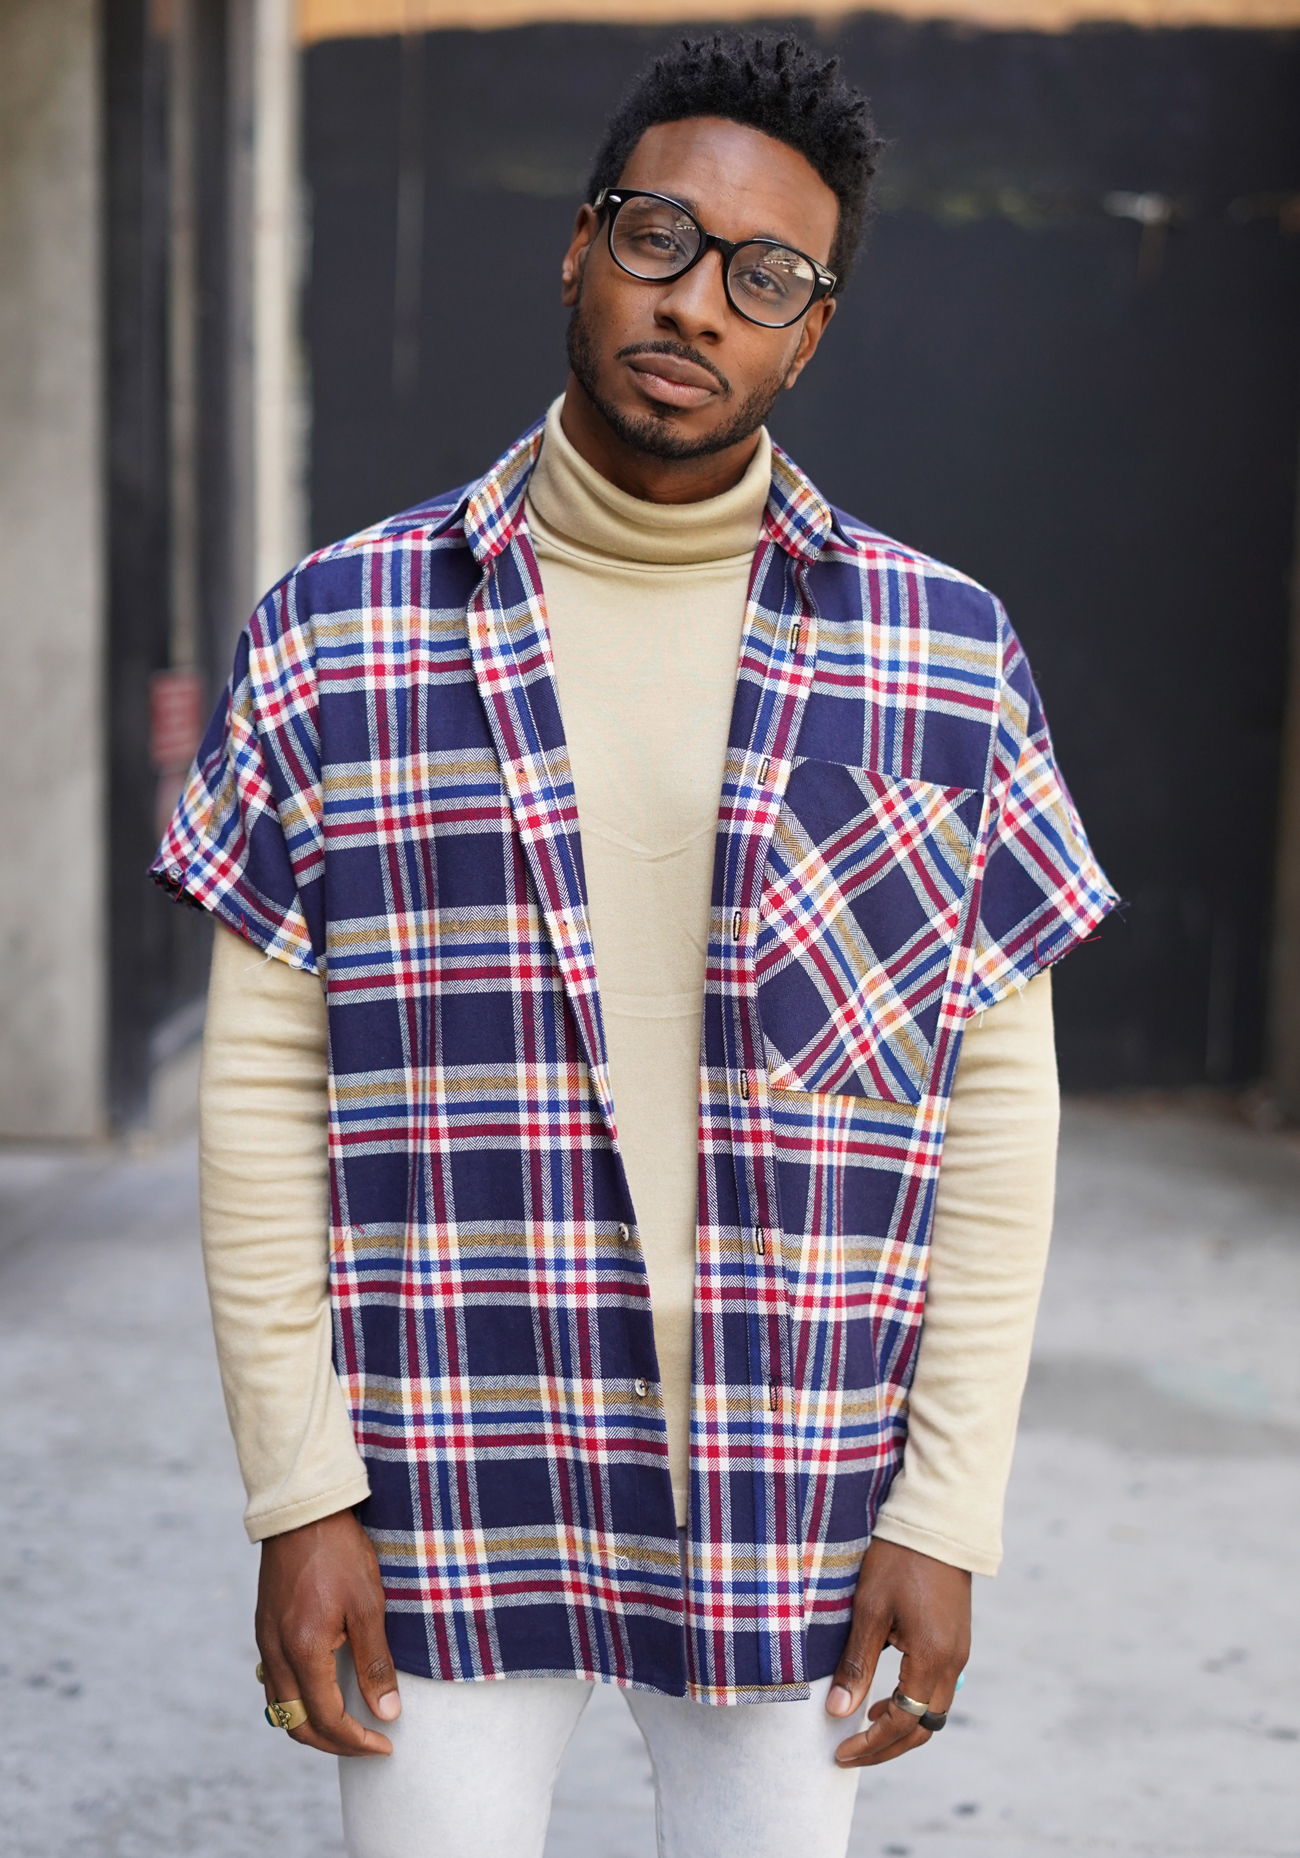 DIY TURTLENECK AND BUTTON UP COMBO – Norris Danta Ford